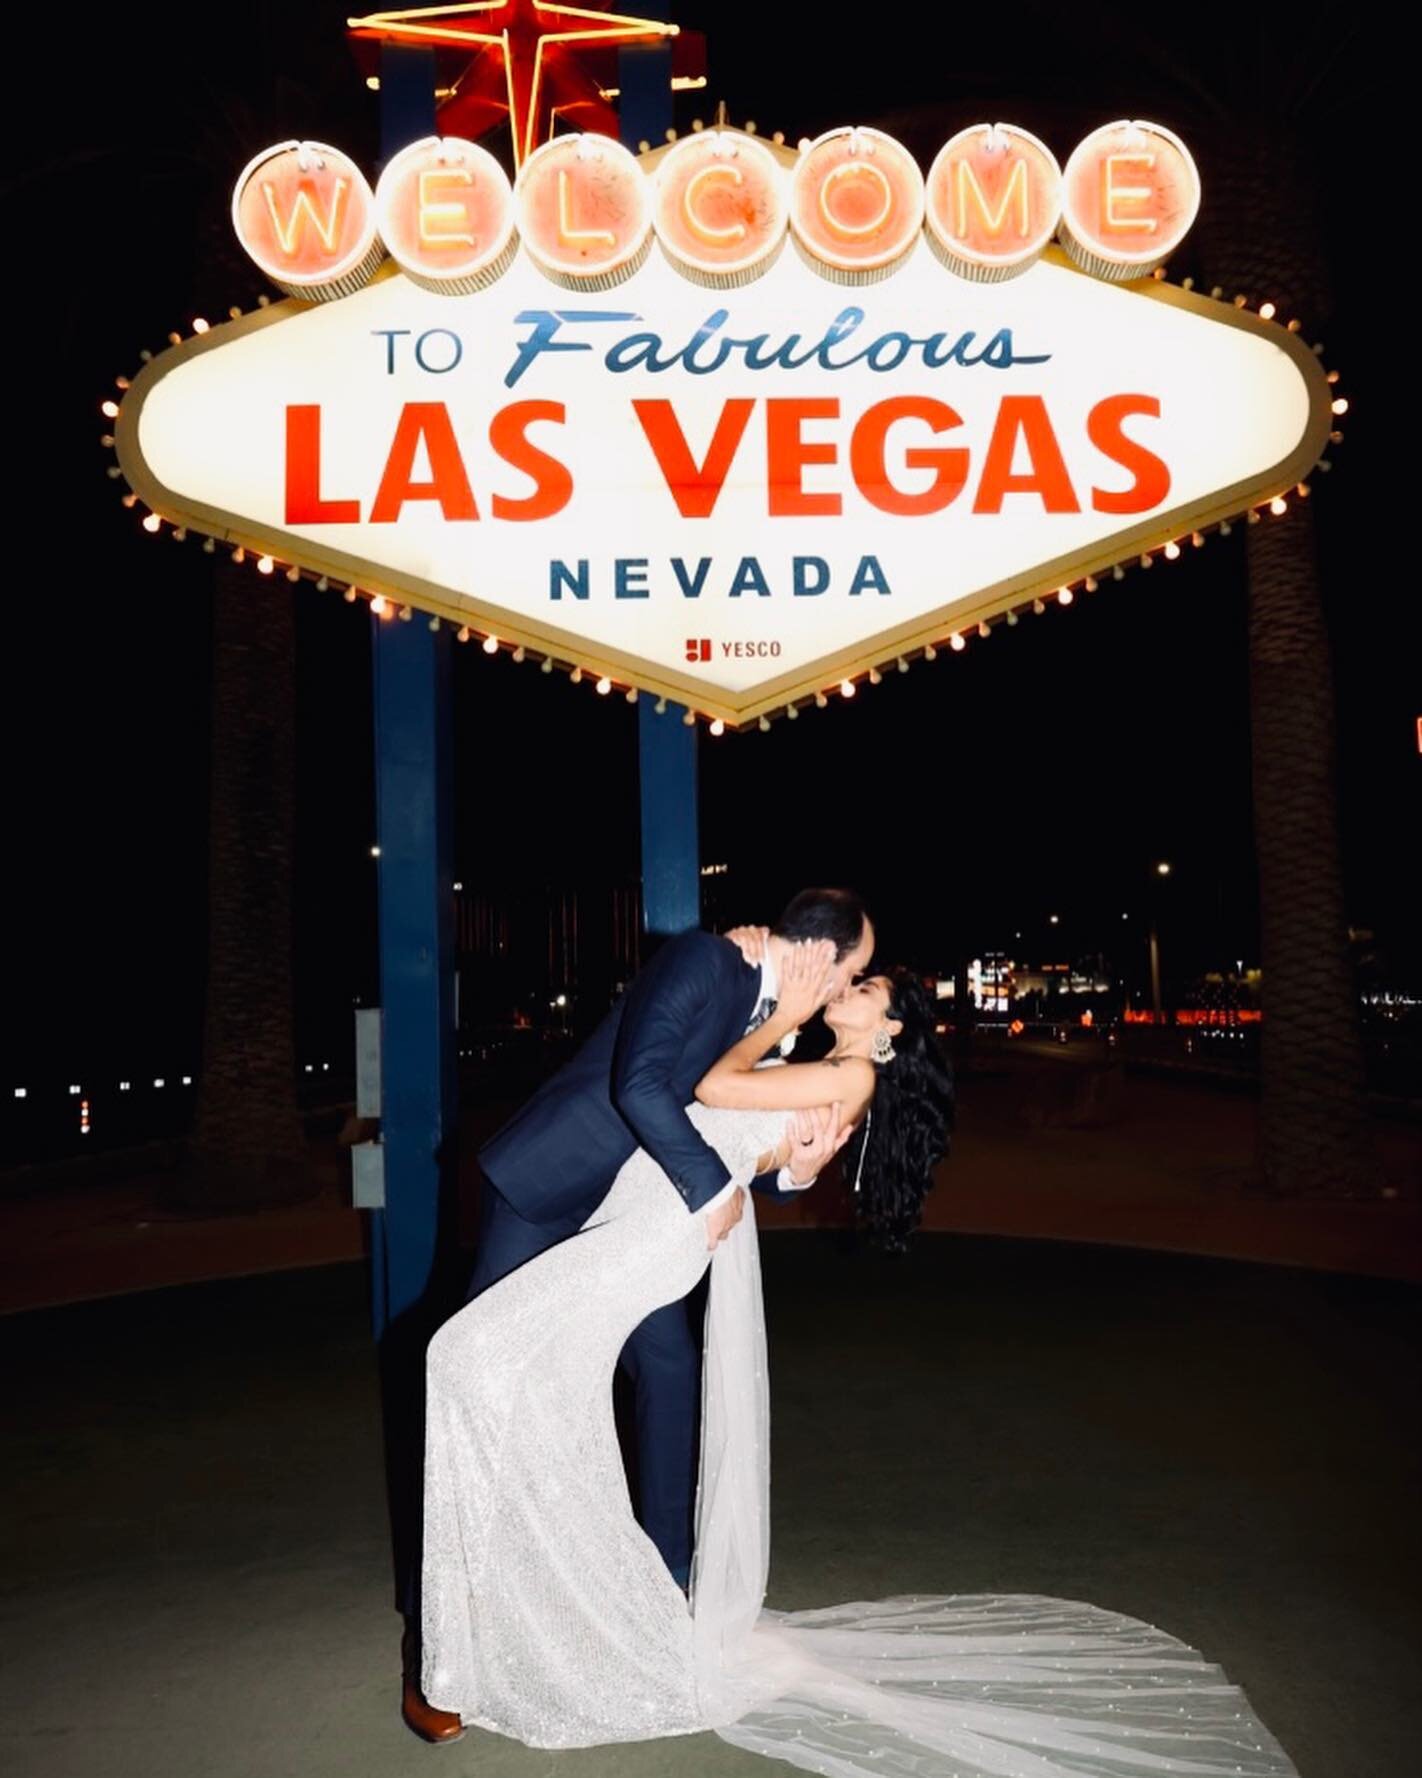 lol oops! surprise! 

life update: i 10/10 recommend a vegas elopment - shit was fun as hell. a more formal wedding/nikka etc is to come but we just couldn&rsquo;t wait to get those sweet, sweet, sweet&hellip;.tax benefits 😂 instagram, meet my husba